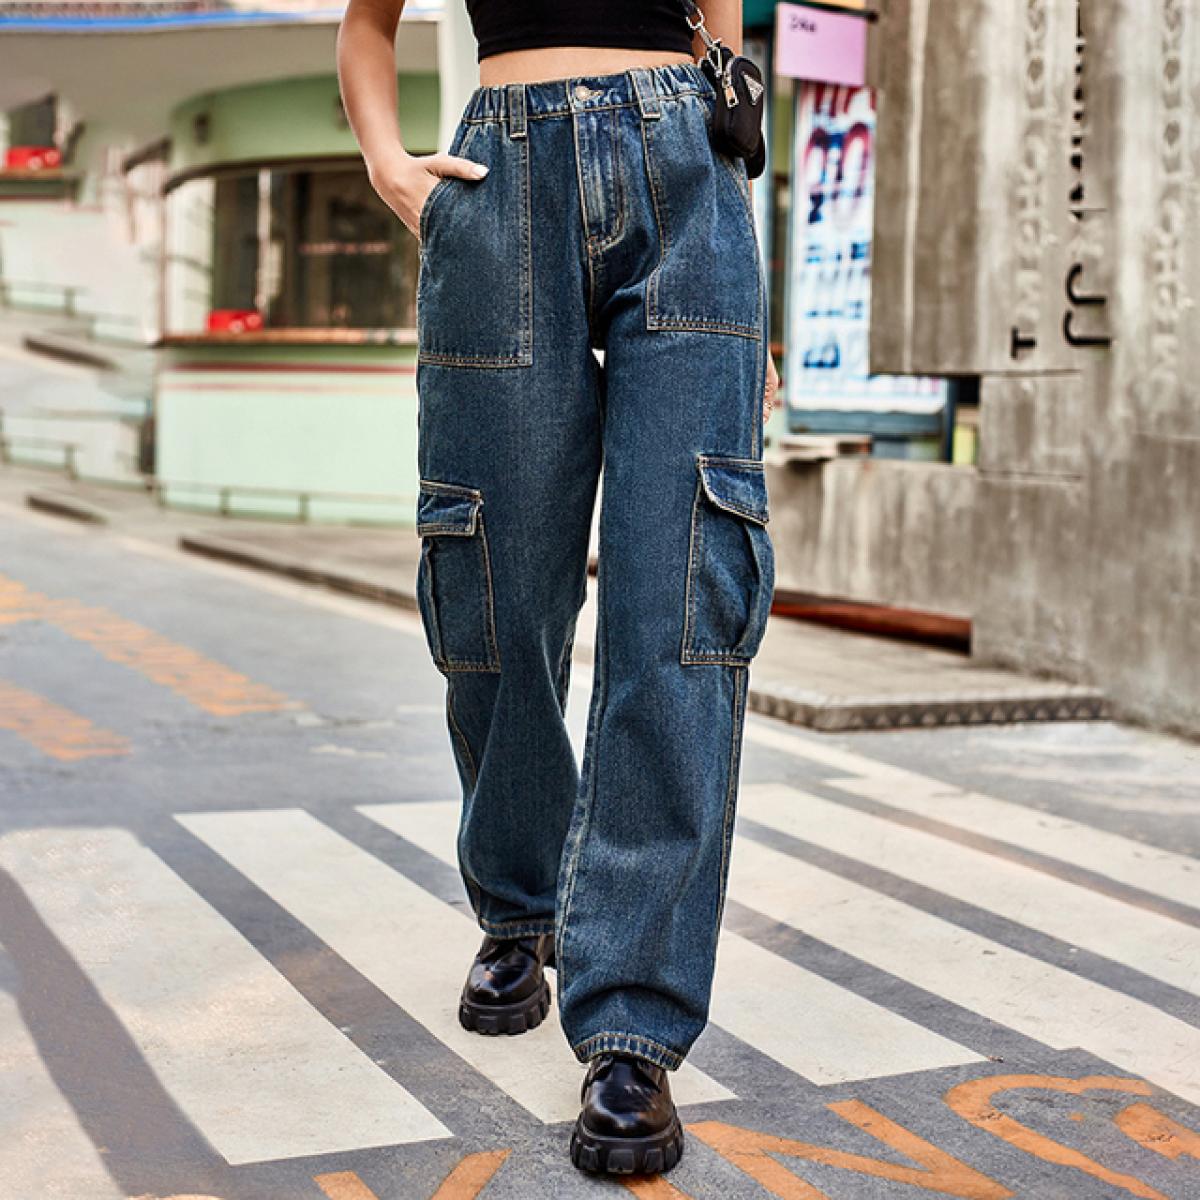 Casual and Chic: Styling Baggy Cargo Pants